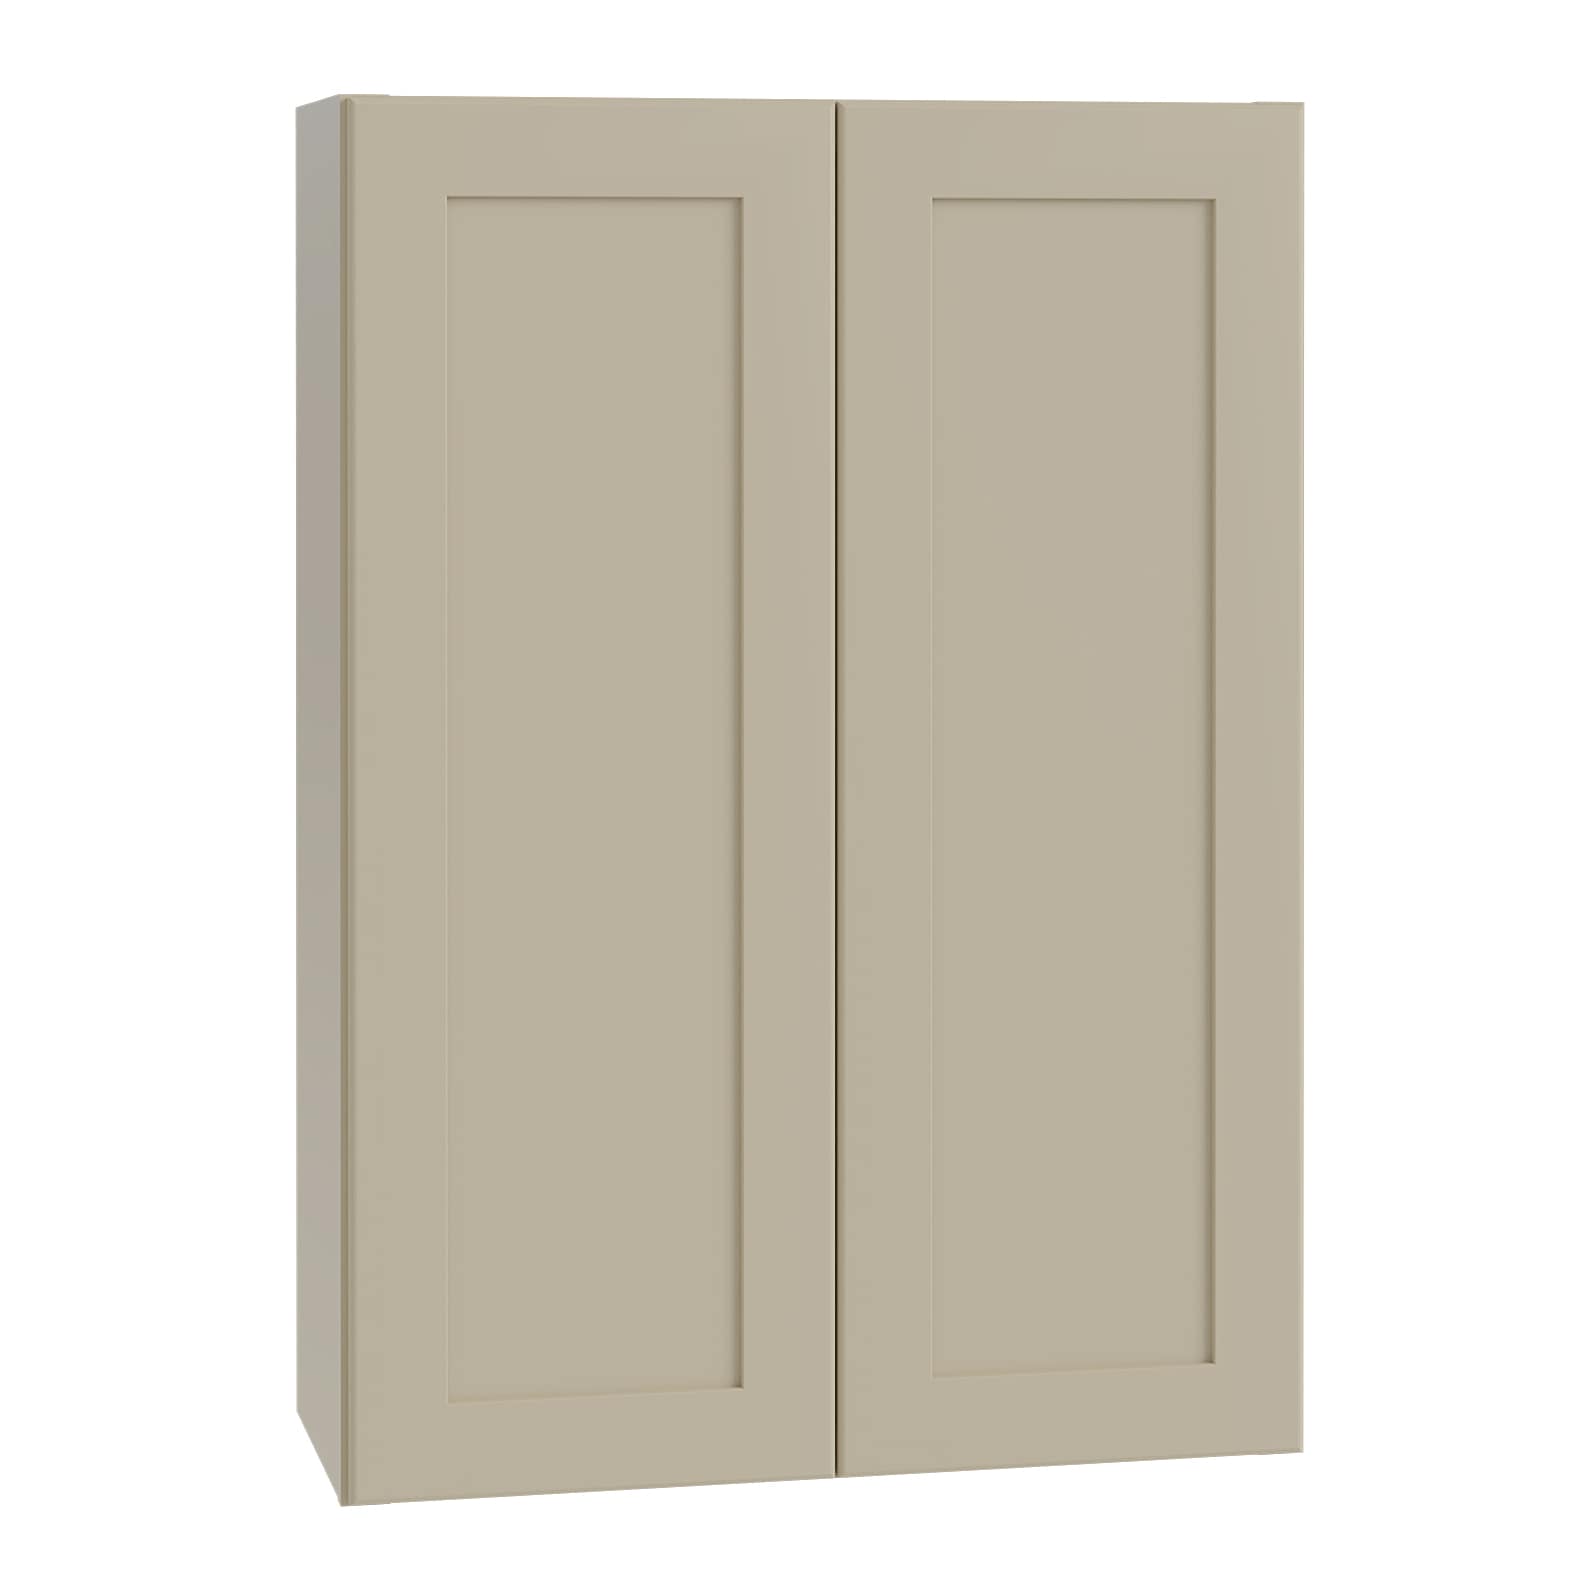 Luxxe Cabinetry 30-in W x 42-in H x 12-in D Norfolk Blended Cream Painted Door Wall Fully Assembled Semi-custom Cabinet in Off-White | W3042-NBC